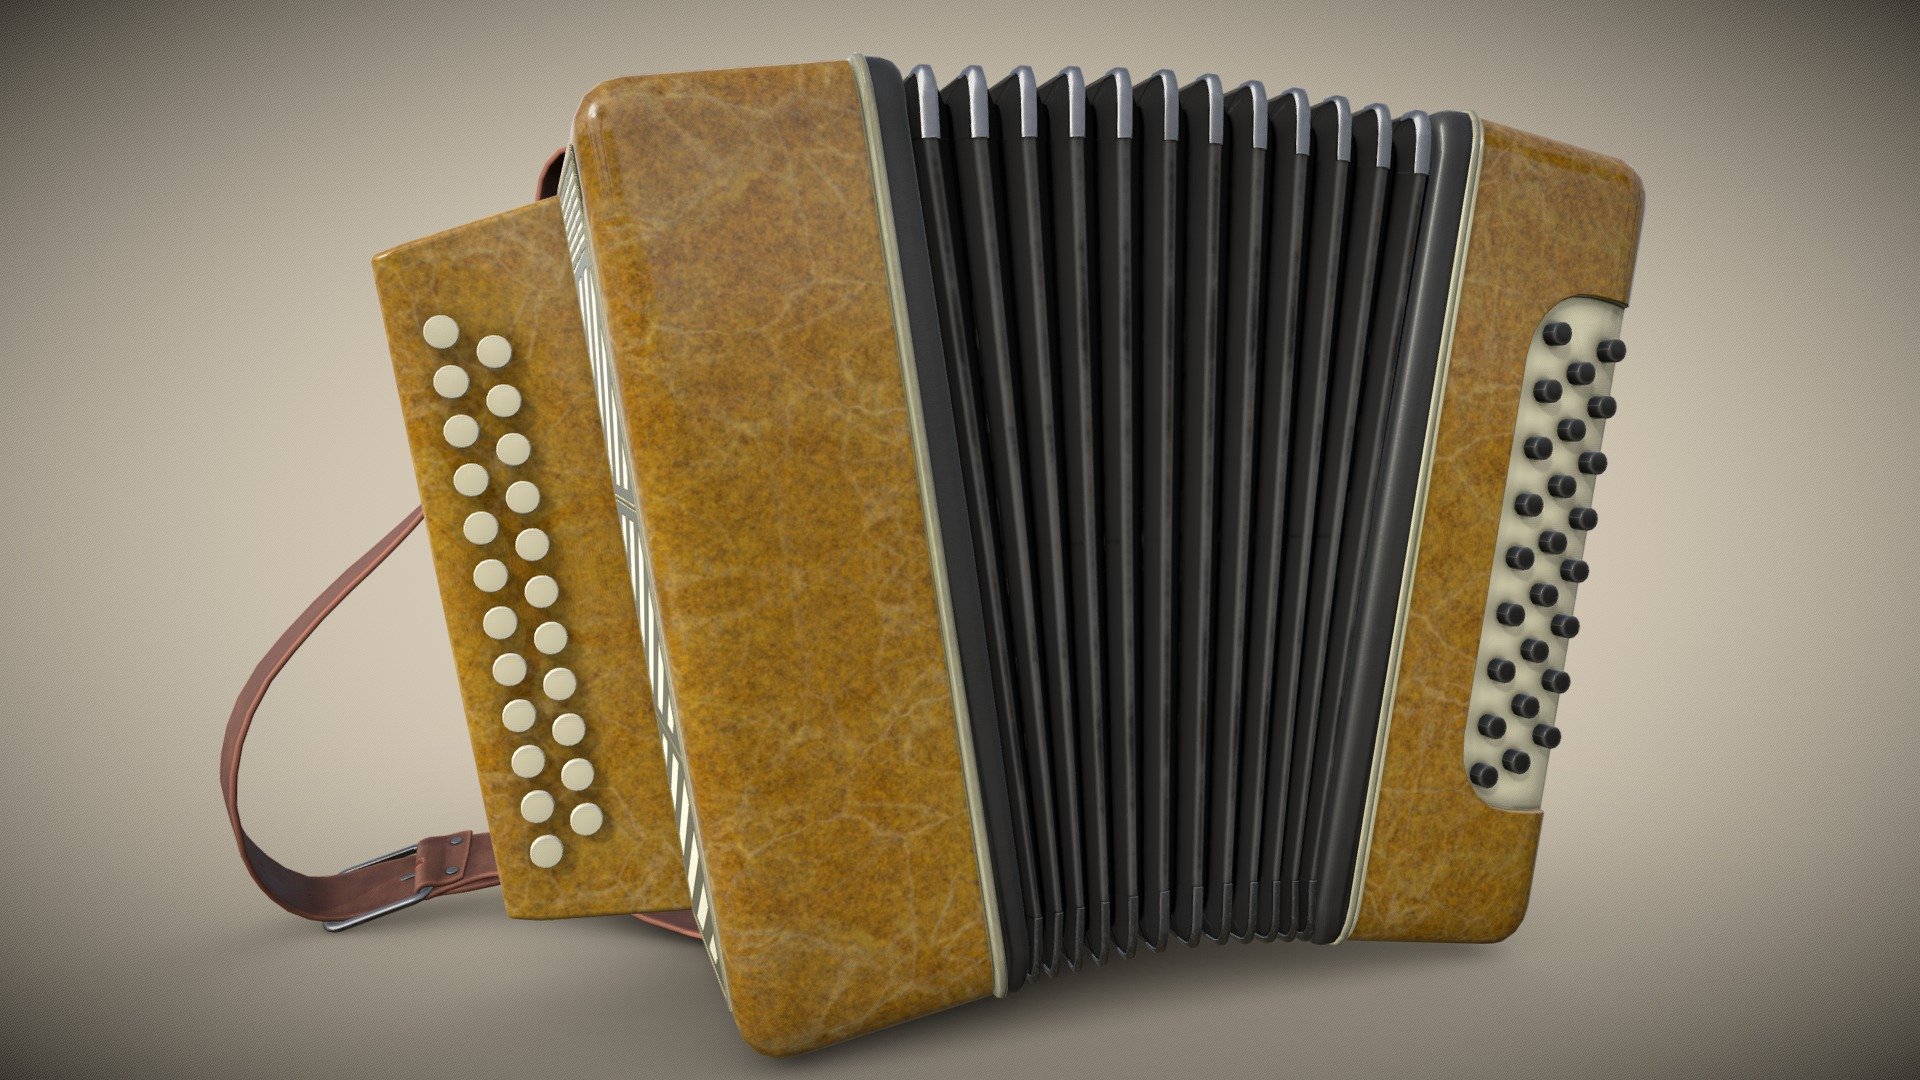 Musical instrument accordion button accordion 3 model low-poly game ready
all models are separated
Polygons 14050
Vertices 14147
Royalty free this mean you can use this product in any 
commercial and noncommercial purpose but you can't resale
this asset as is 3d model